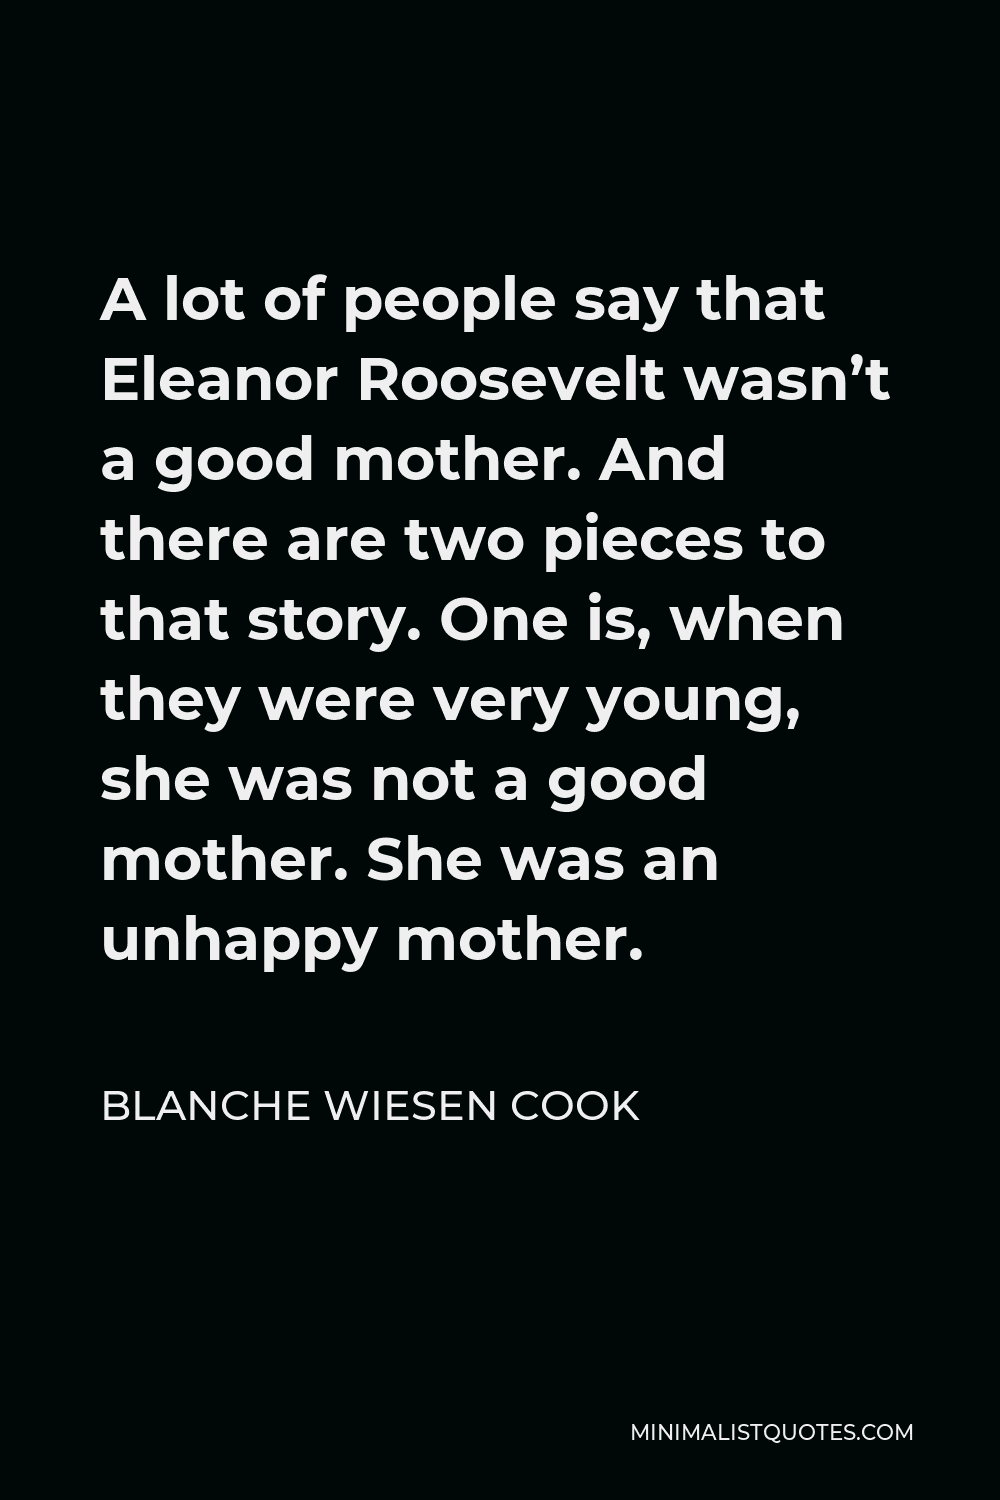 Blanche Wiesen Cook Quote - A lot of people say that Eleanor Roosevelt wasn’t a good mother. And there are two pieces to that story. One is, when they were very young, she was not a good mother. She was an unhappy mother.